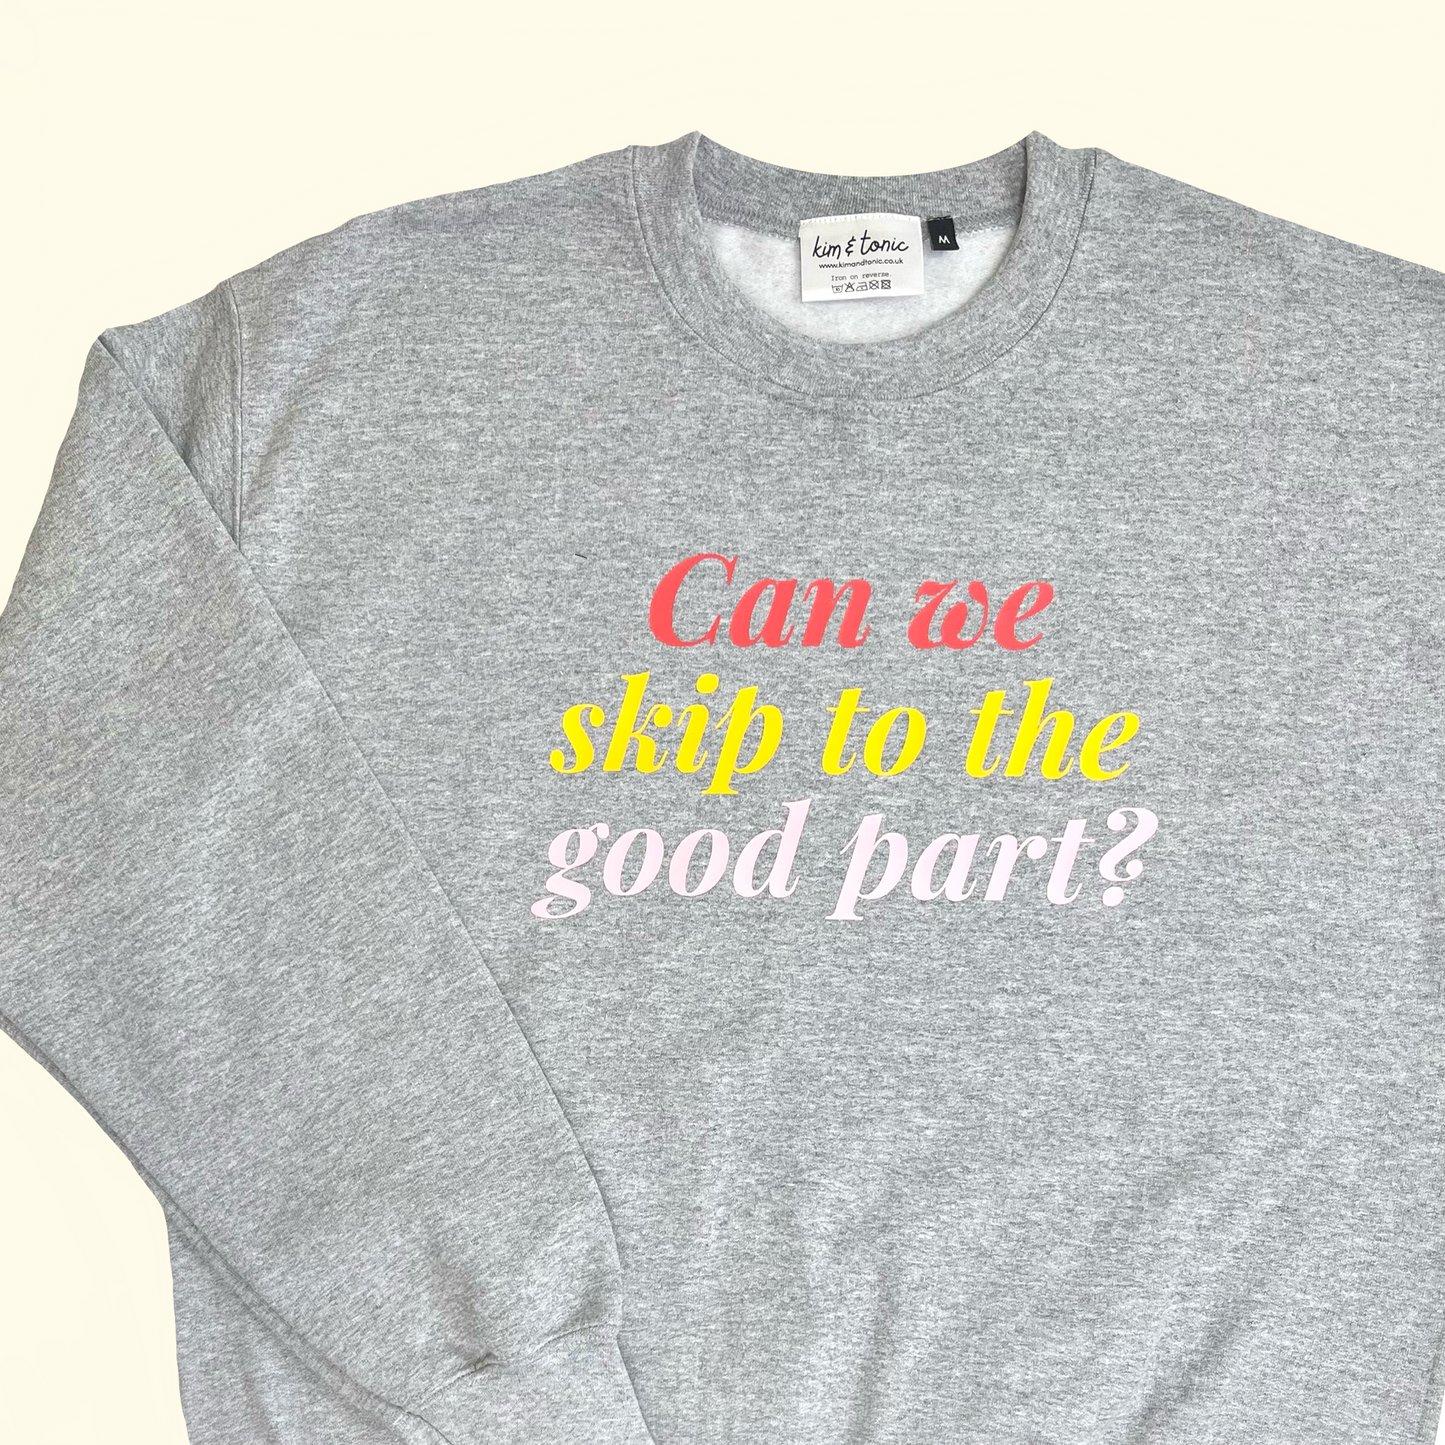 CAN WE SKIP TO THE GOOD PART? SWEATSHIRT. Grey with coral, mustard and pink print.